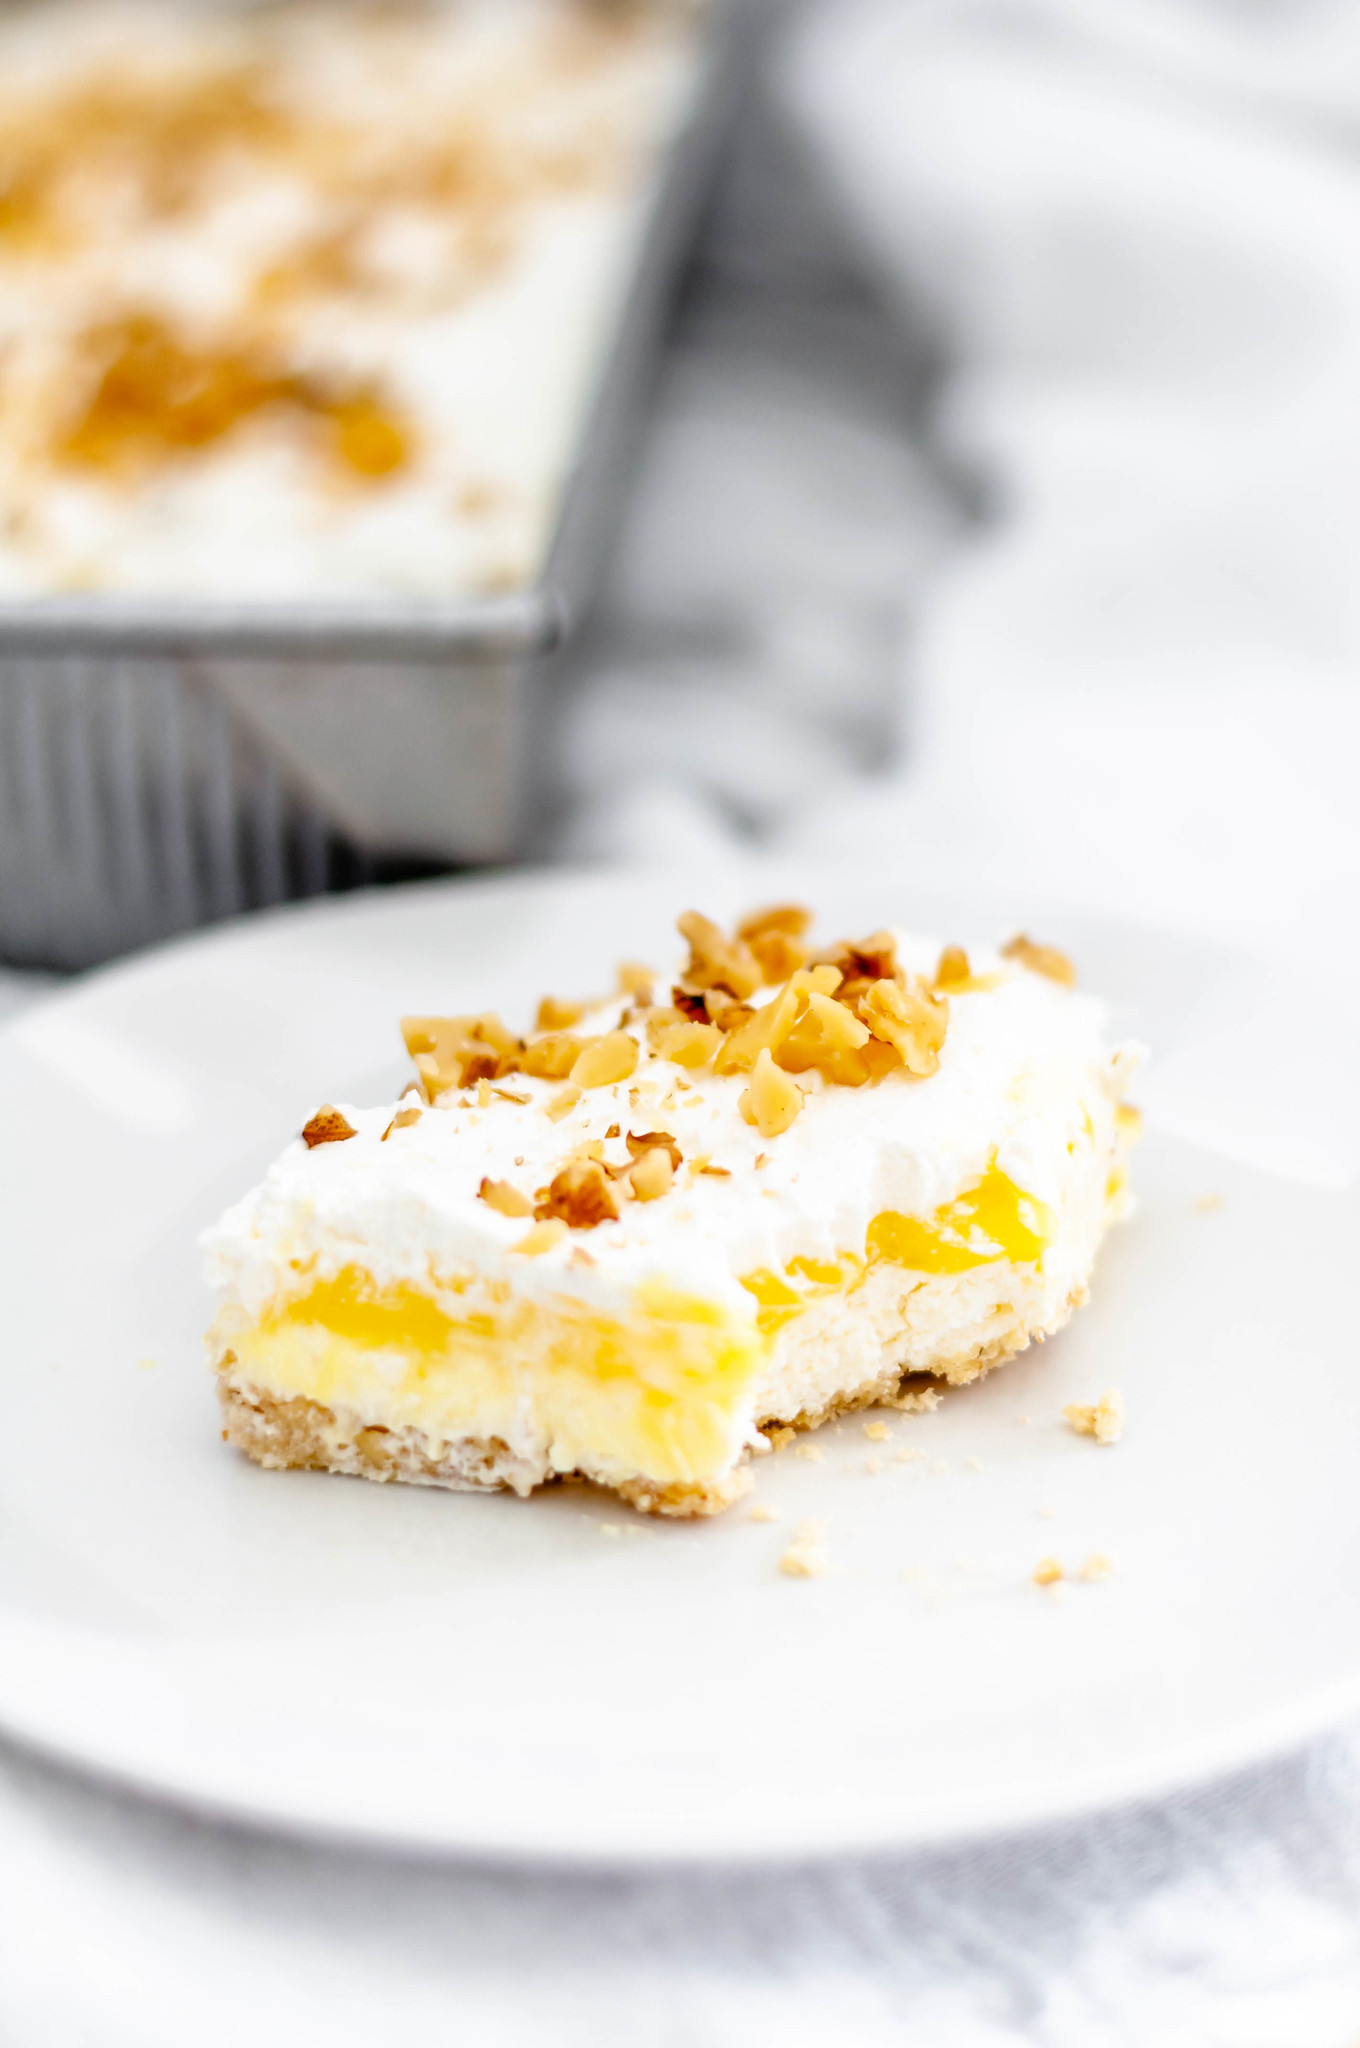 Lemon Hush is a delicious layered dessert of shortbread crust, cream cheese filling, lemon pudding, cool whip and chopped nuts. A family favorite.